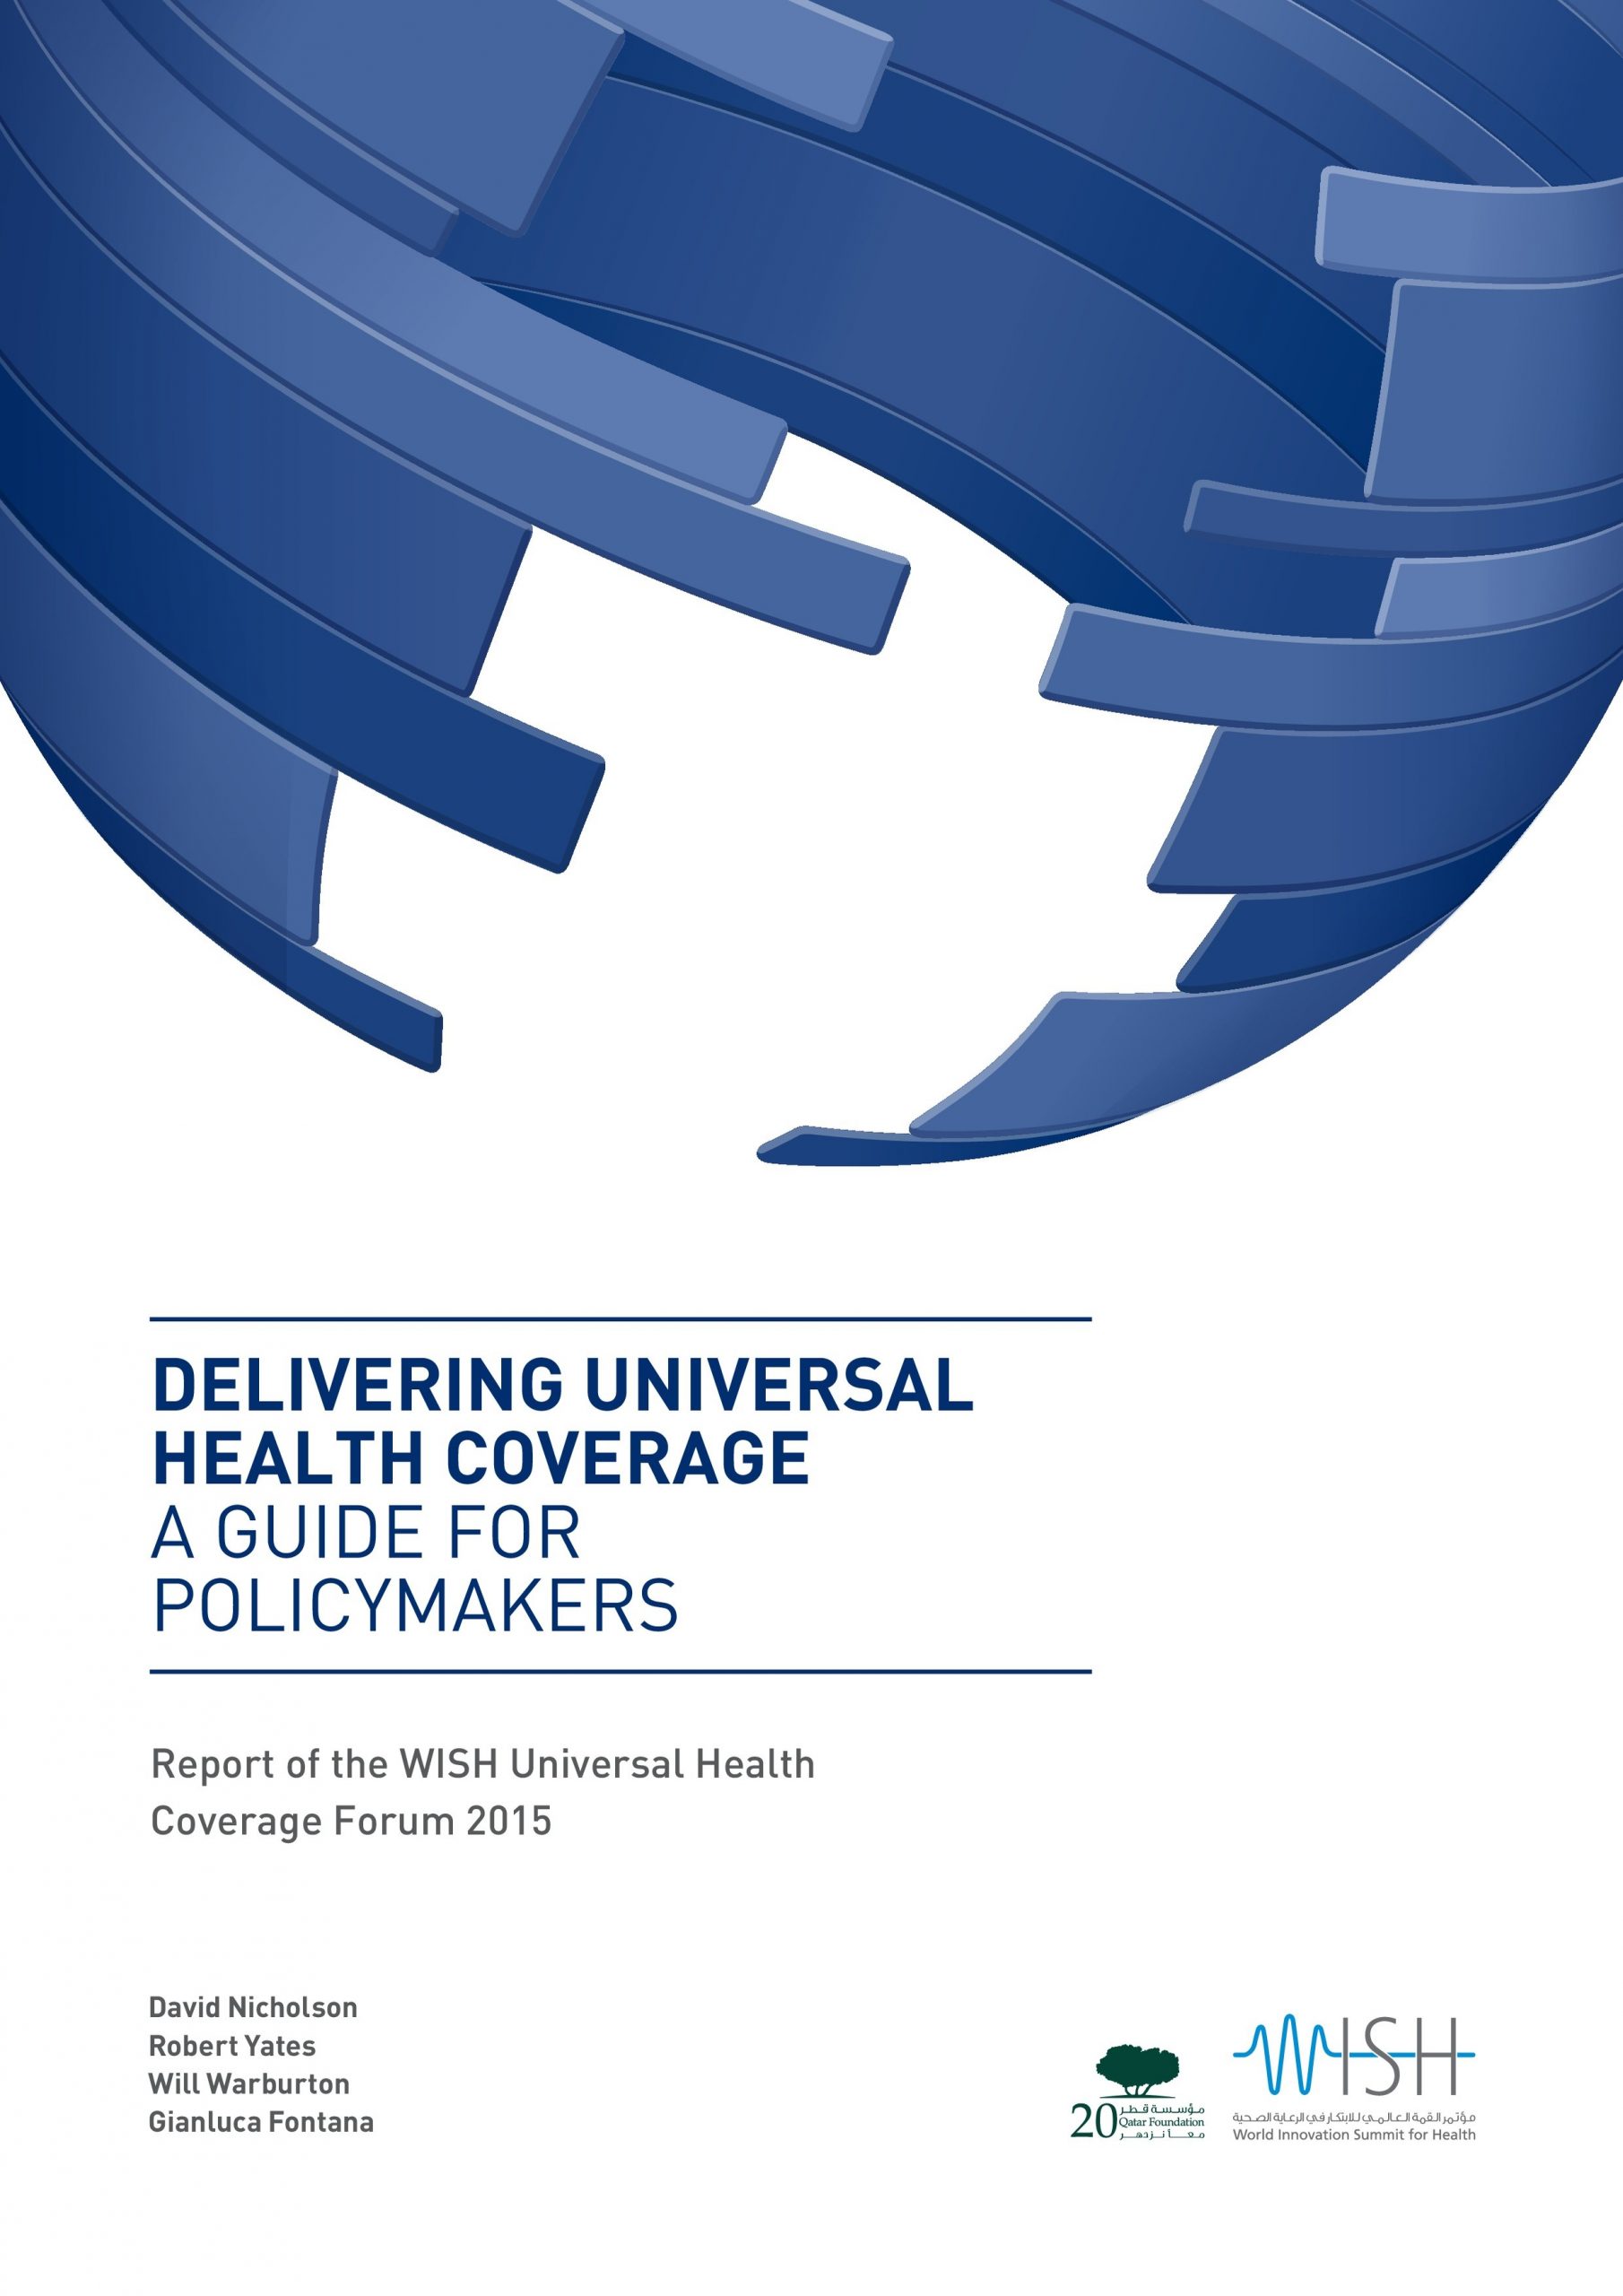 Delivering Universal Health Coverage: A Guide for Policymakers